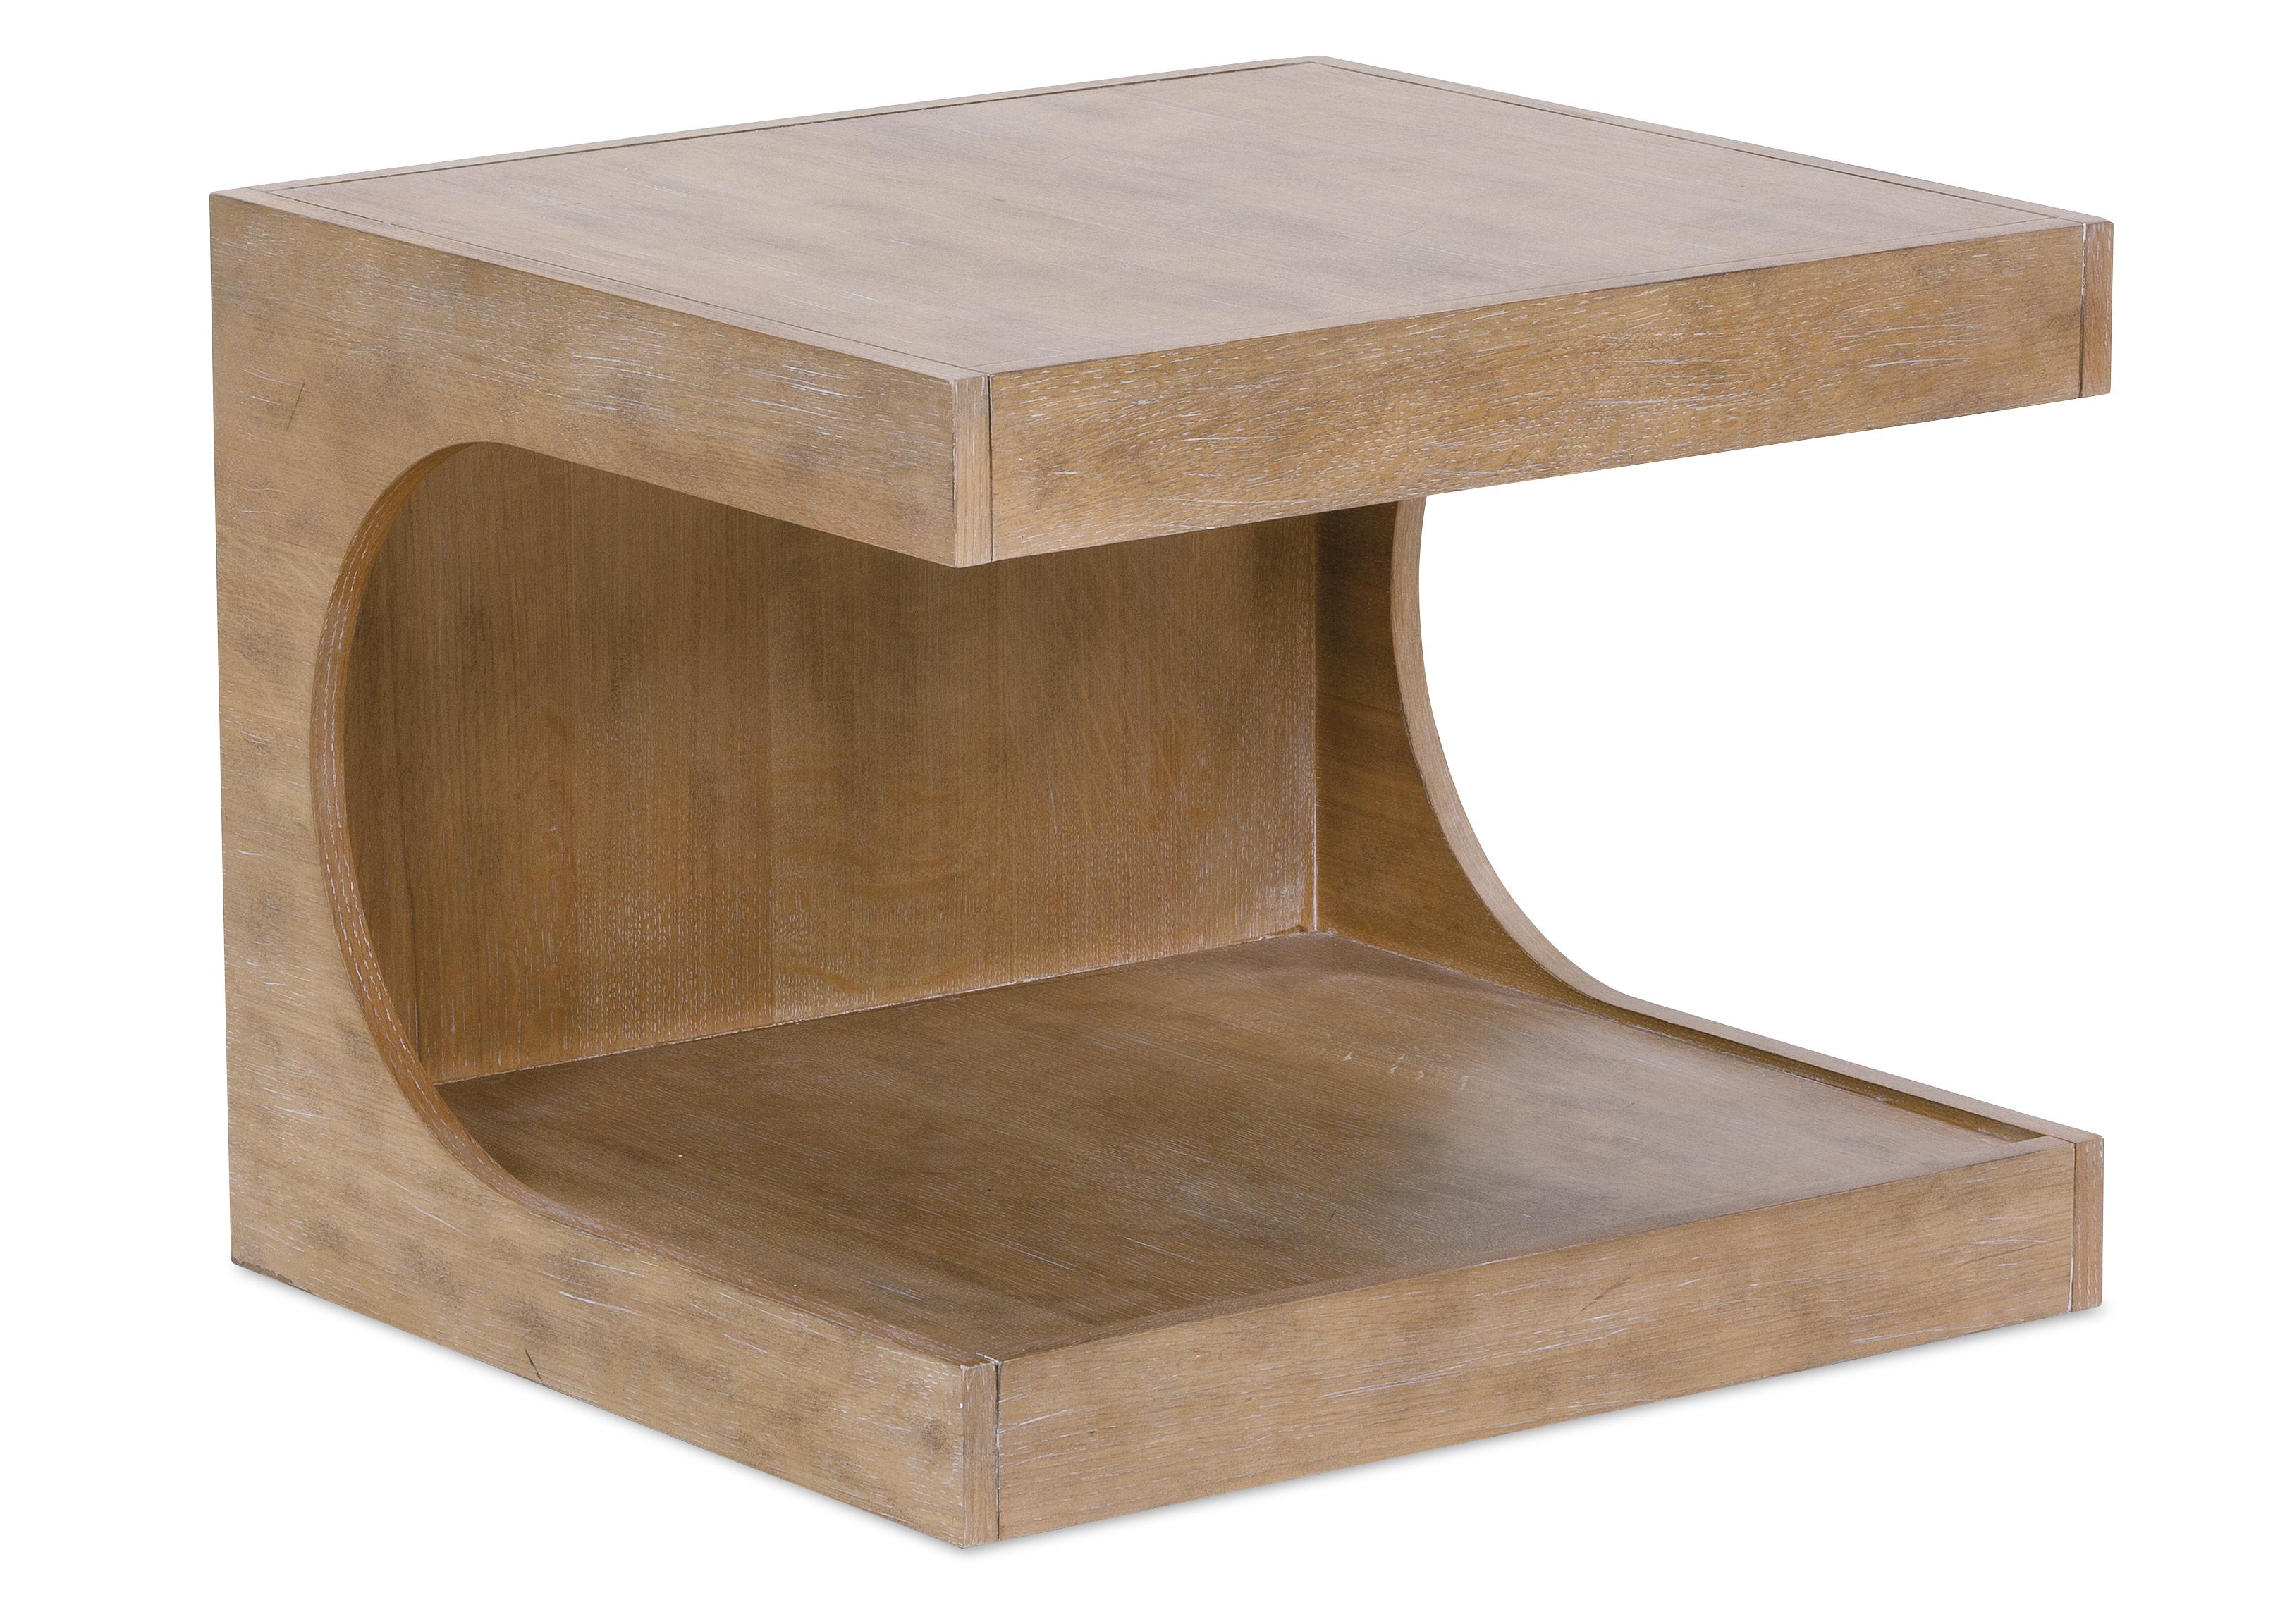 DUNE RECTANGLE COCKTAIL TABLE - Image 1